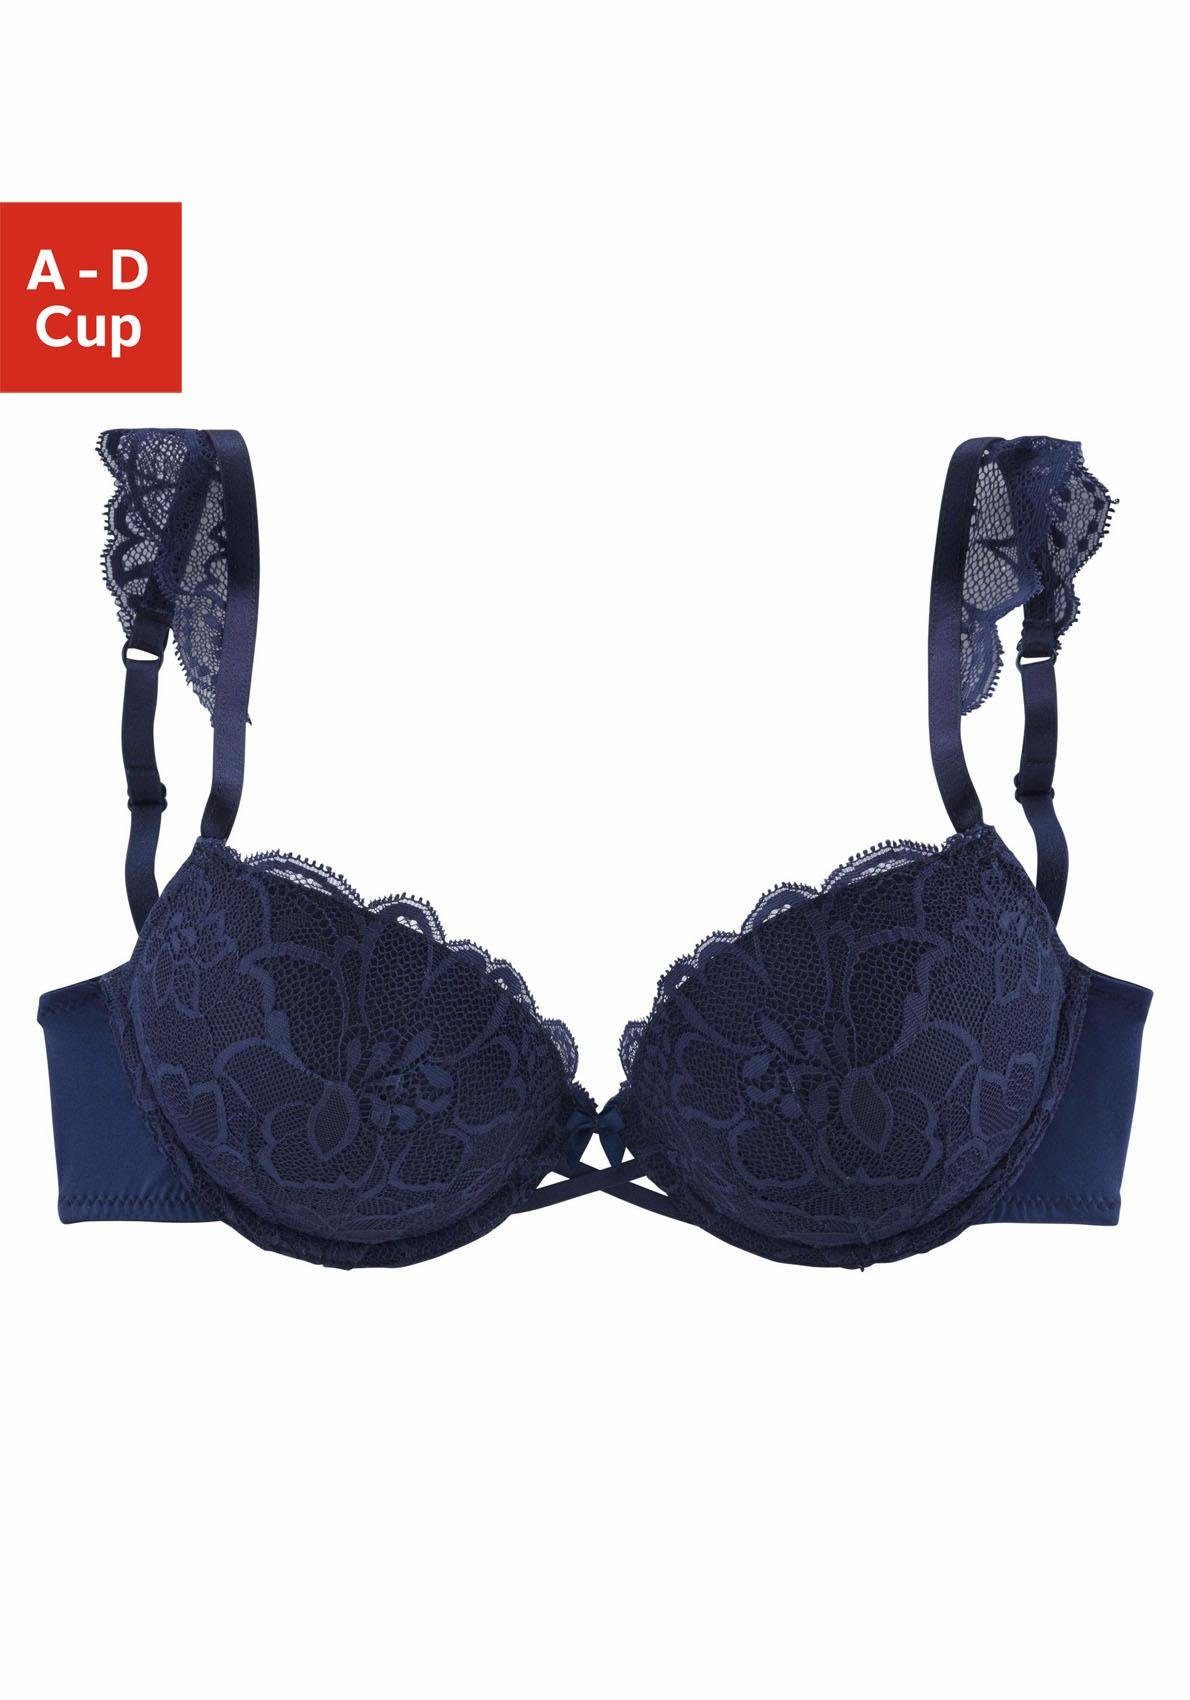 Otto - s.Oliver RED LABEL NU 15% KORTING: s.Oliver RED LABEL Bodywear push-up-bh